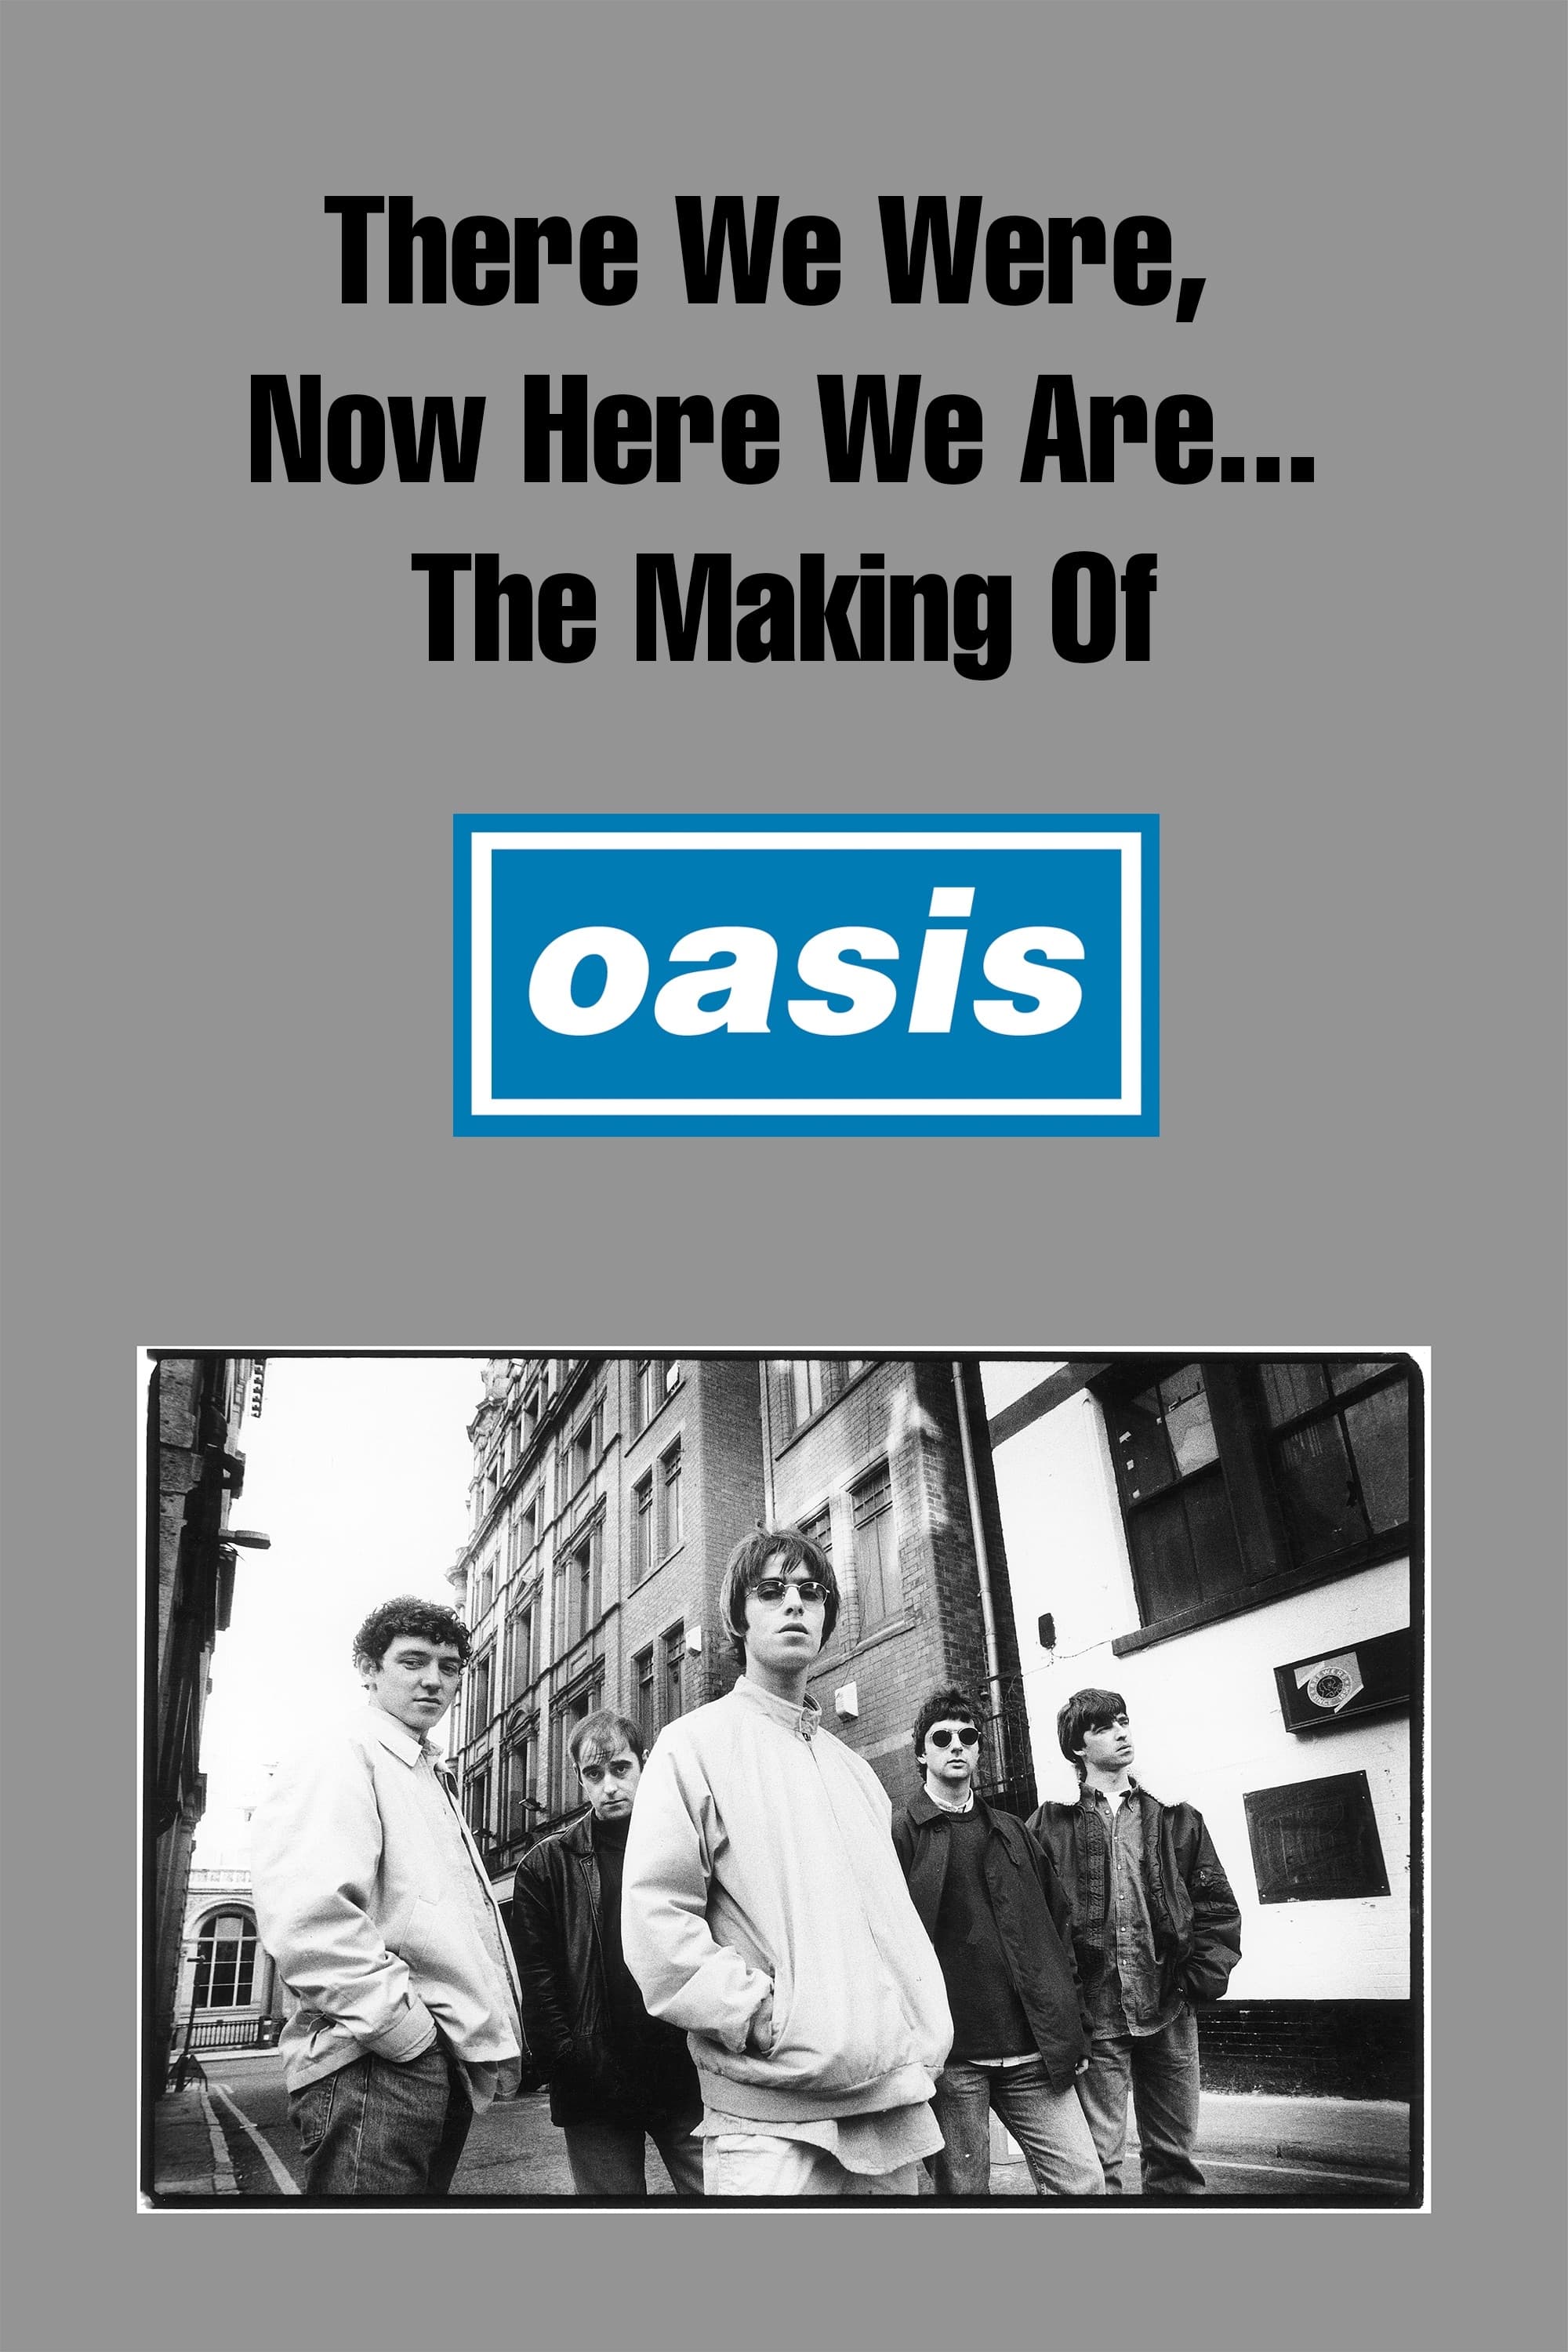 There We Were, Now Here We Are... The Making of Oasis (2004)